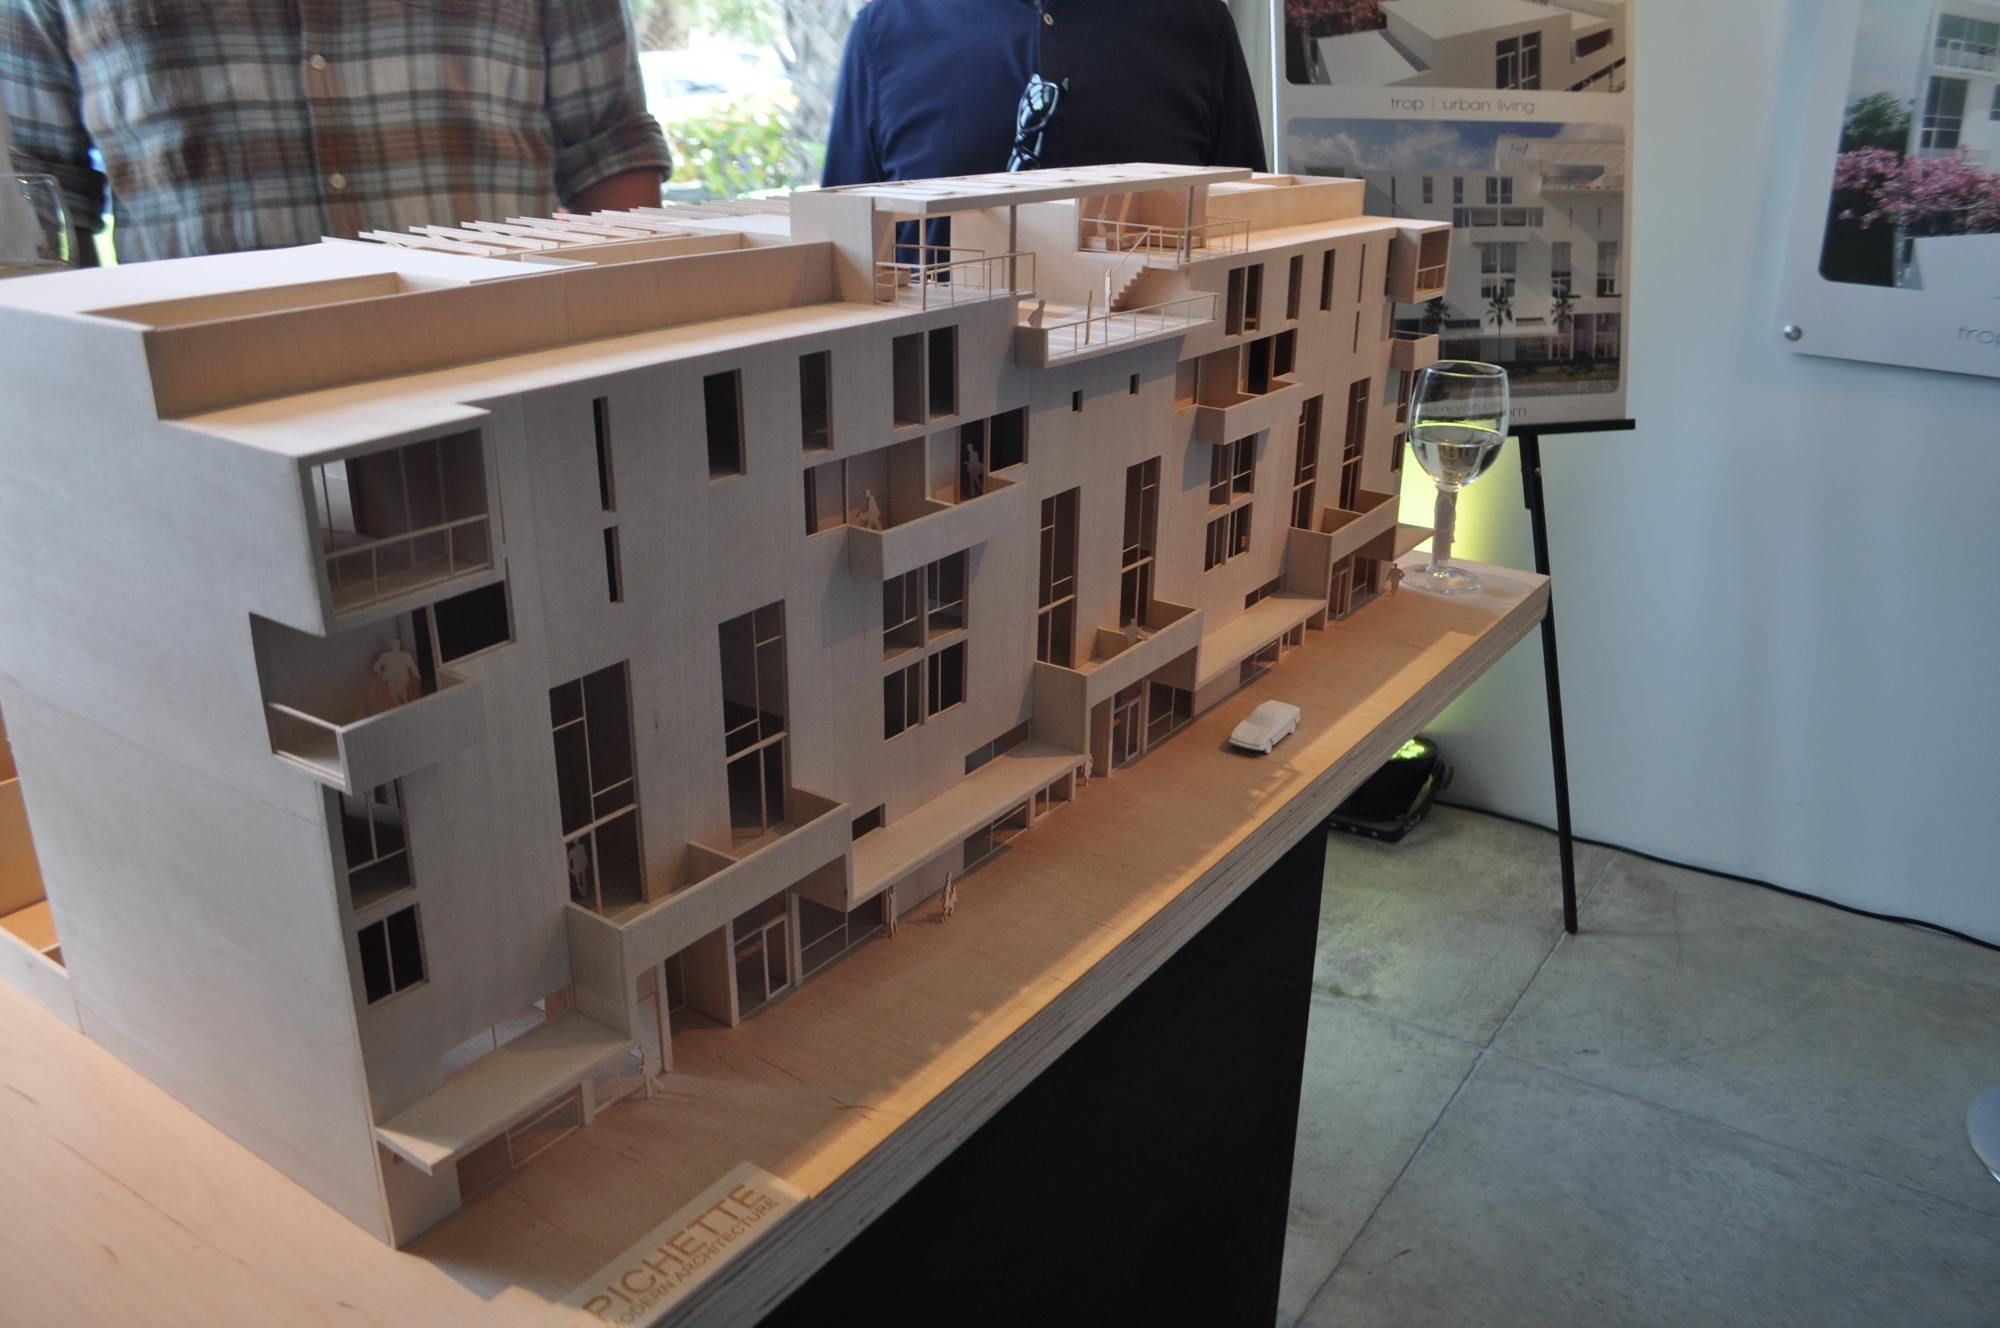 The crowded gathering to celebrate Risdon’s work in the Rosemary District featured a model of the Risdon on 5th project, slated for completion next year. 